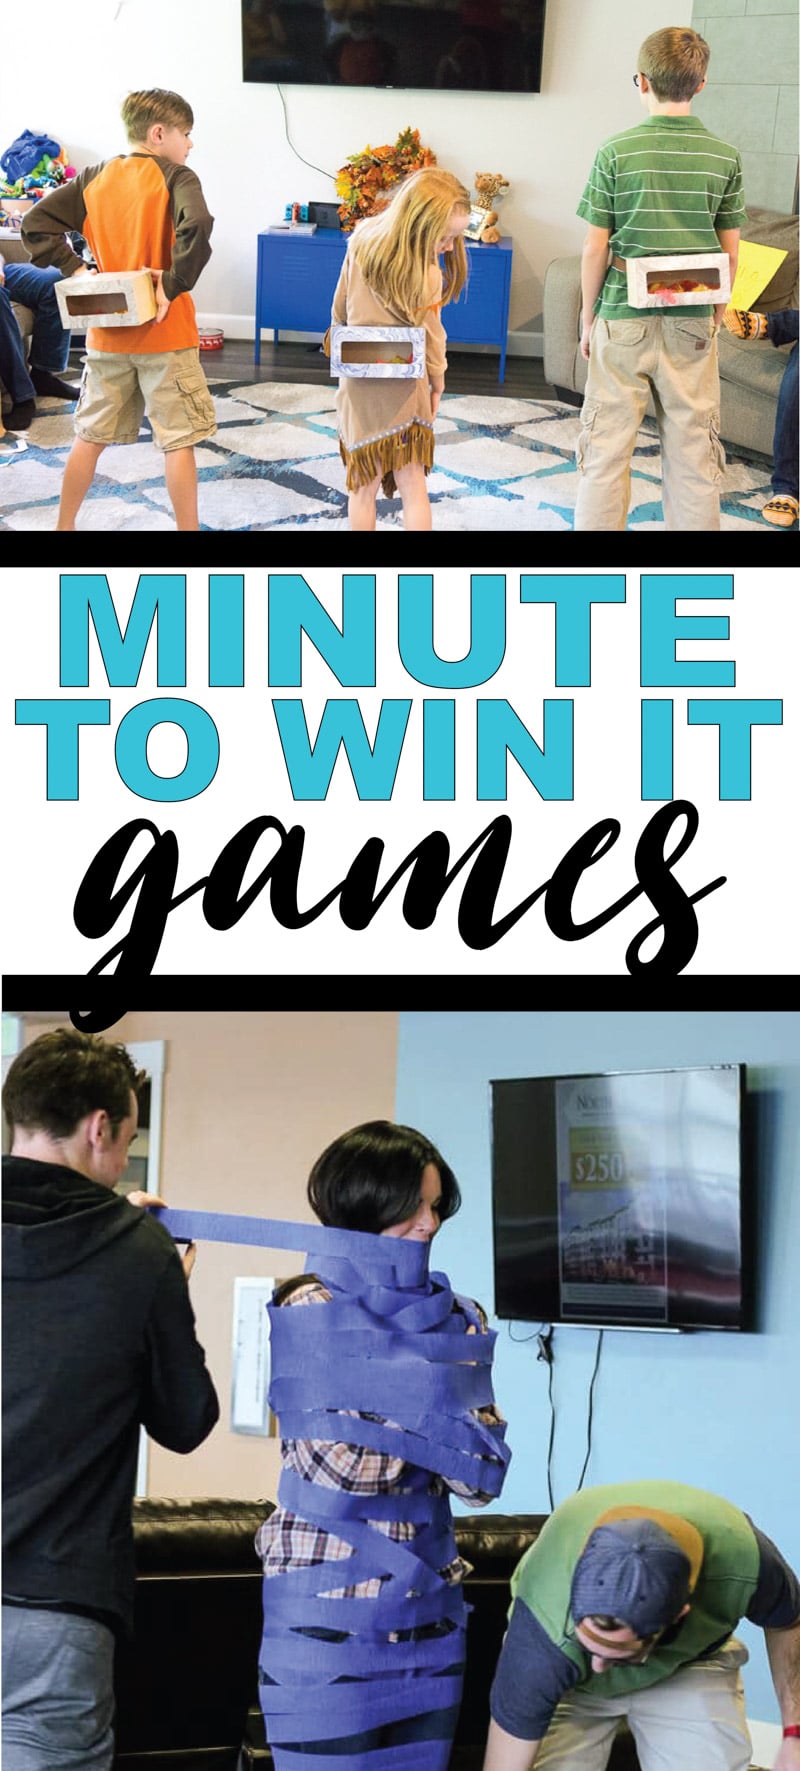 0 Hilarious Minute To Win It Games Everyone Will Absolutely Love